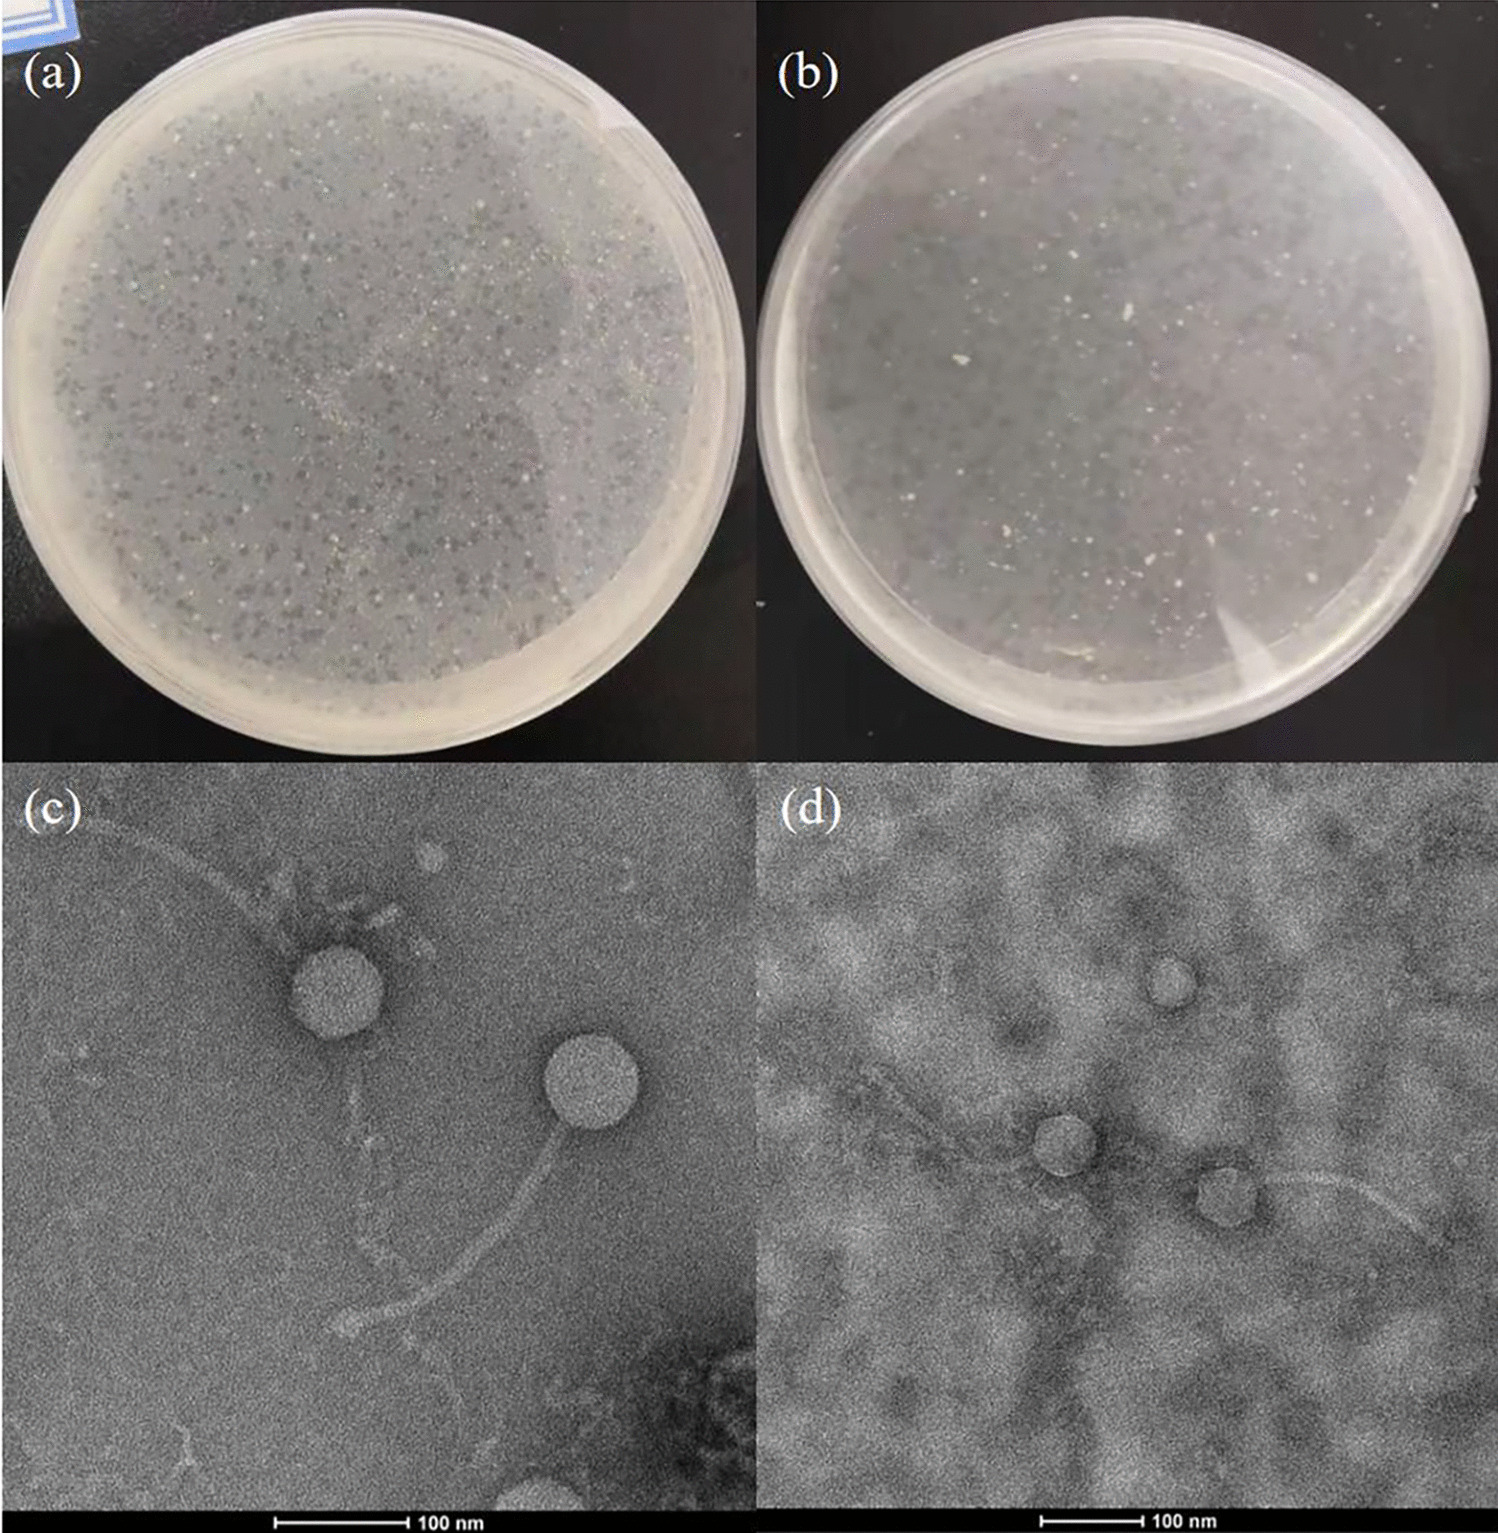 Two novel bacteriophages isolated from the environment that can help control activated sludge foaming